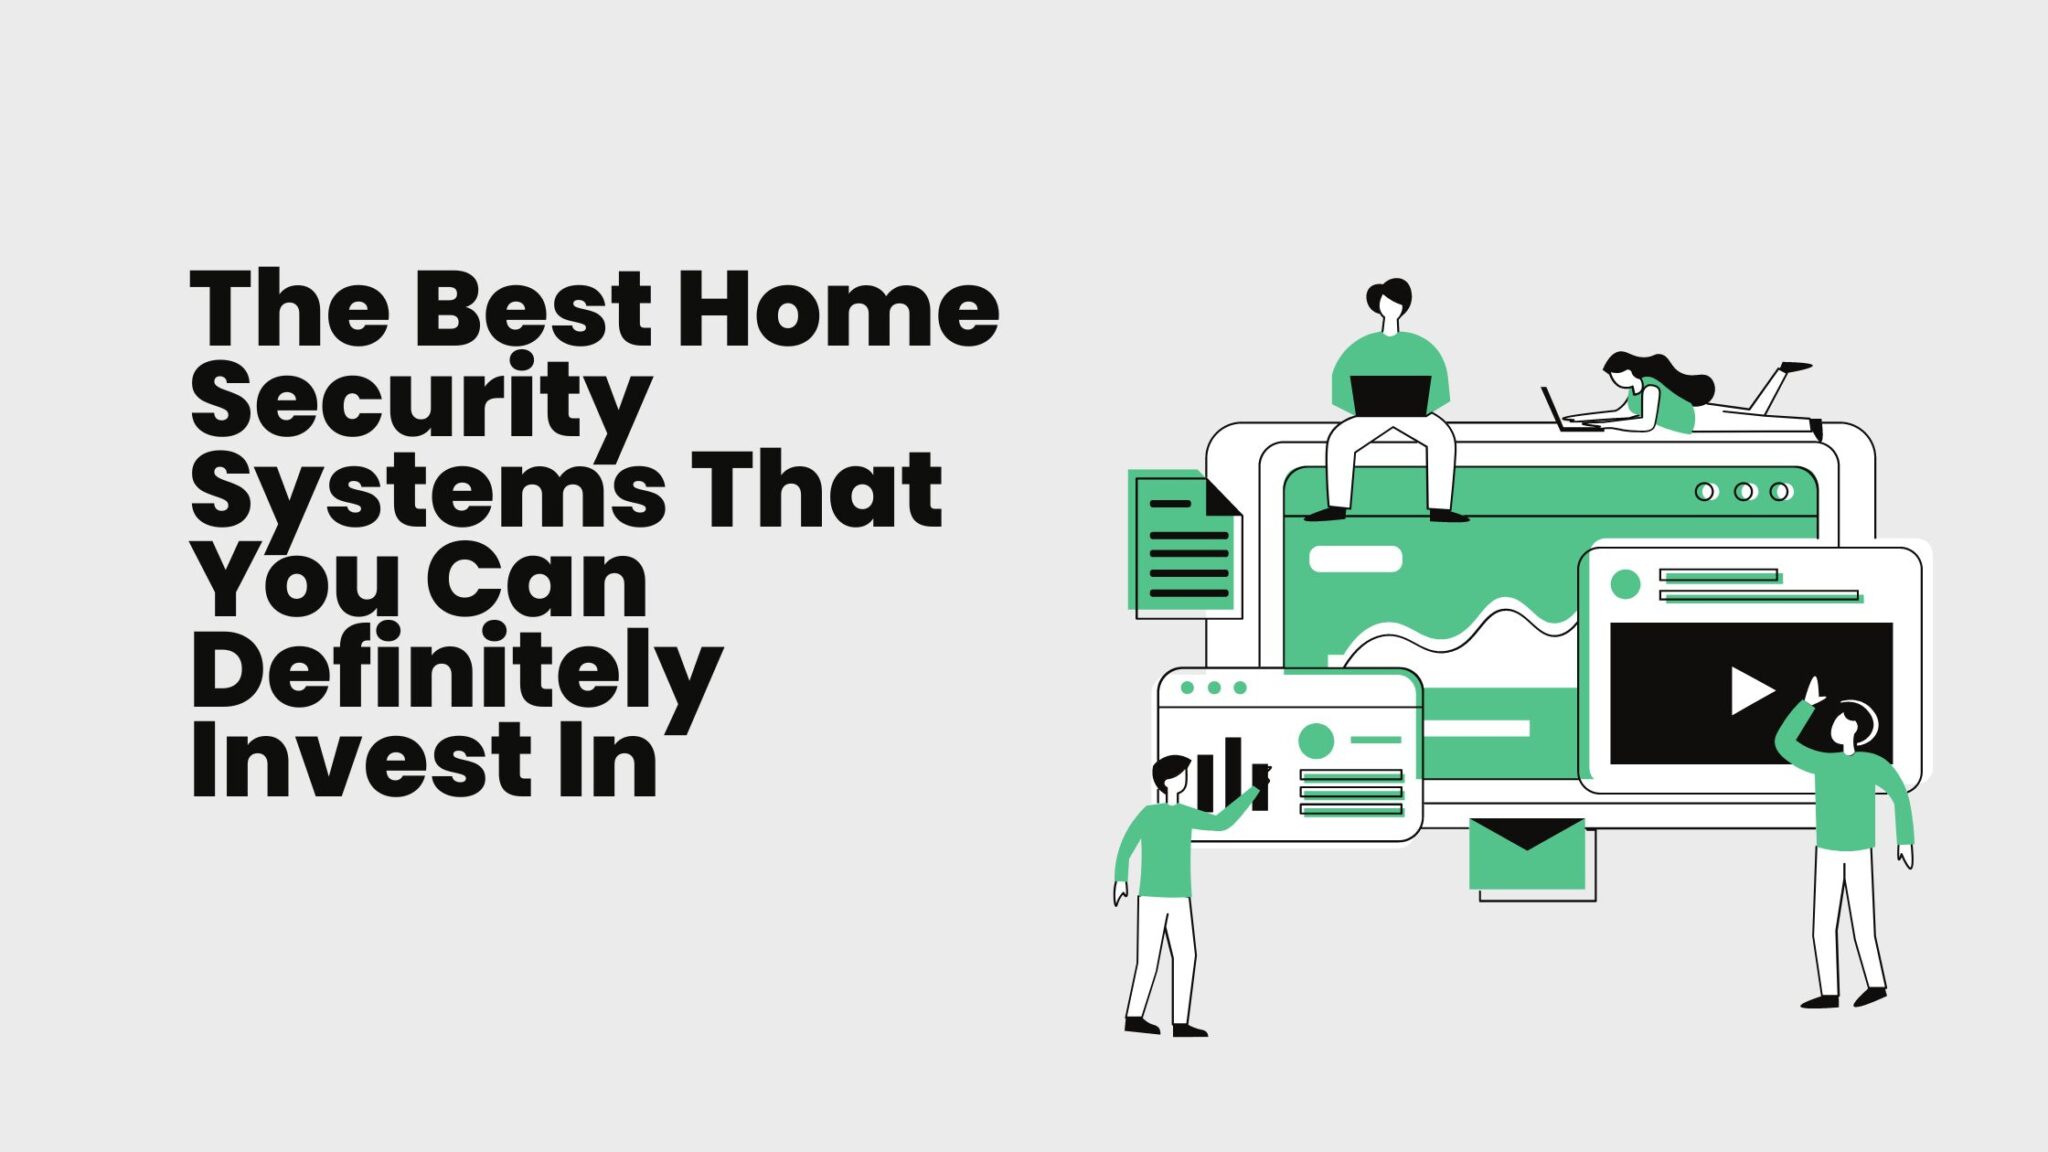 The Best Home Security Systems That You Can Definitely Invest In